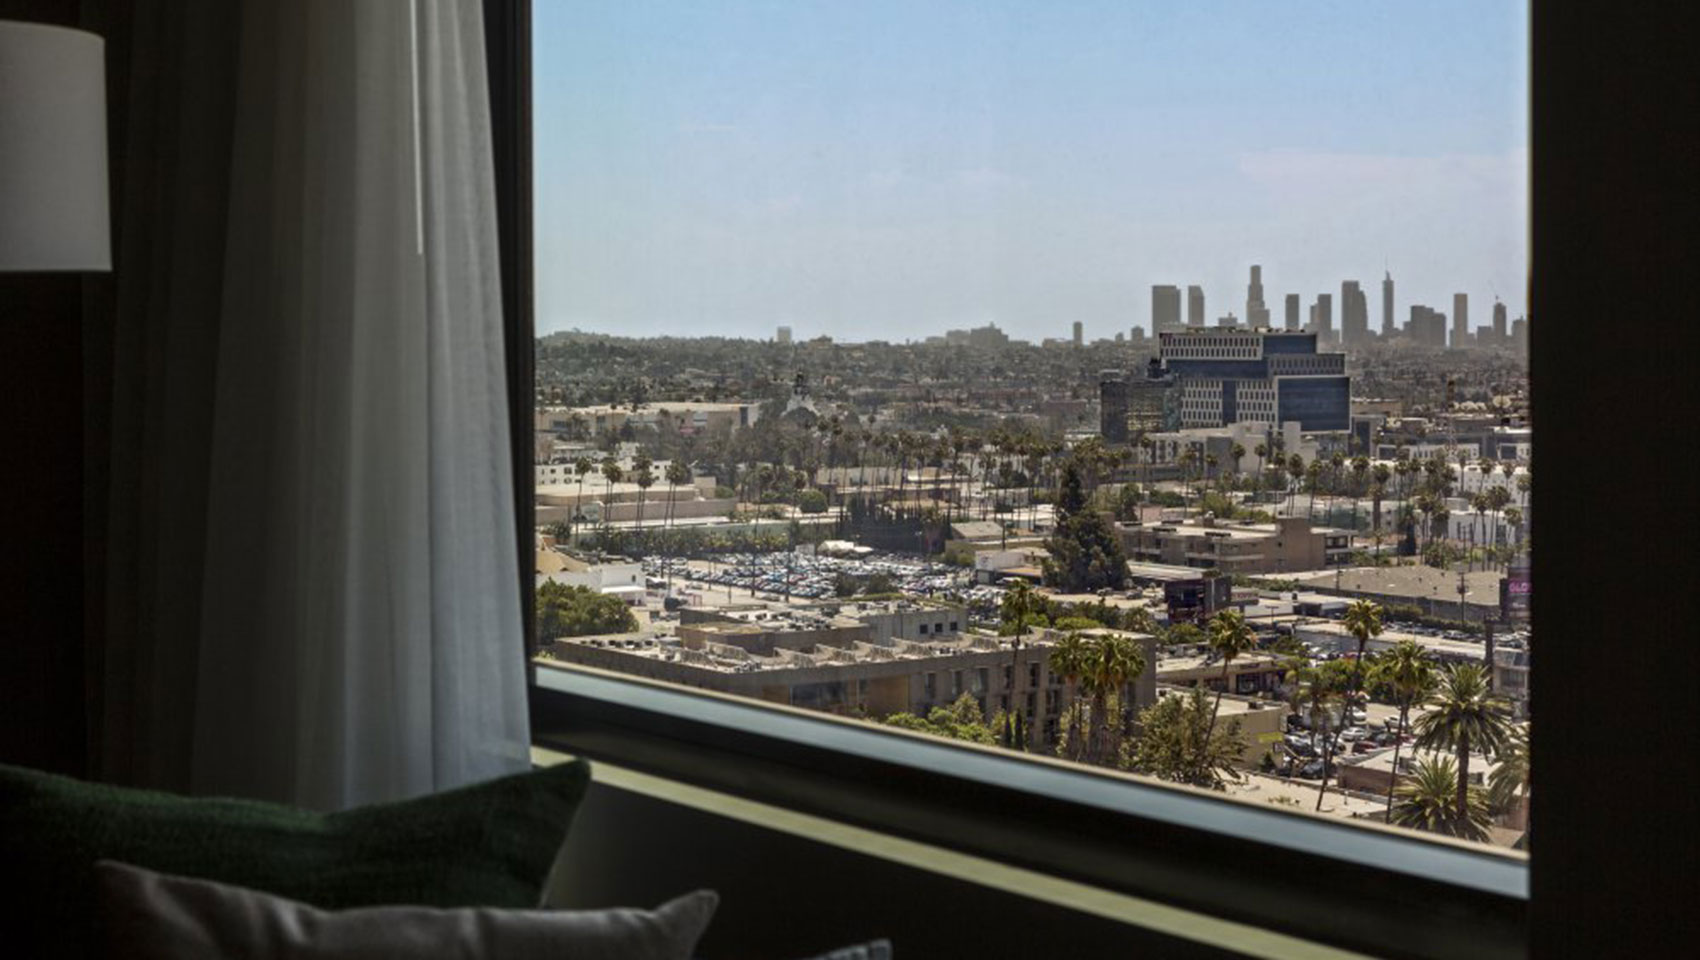 The Kimpton Everly Hotel hollywood guestroom view